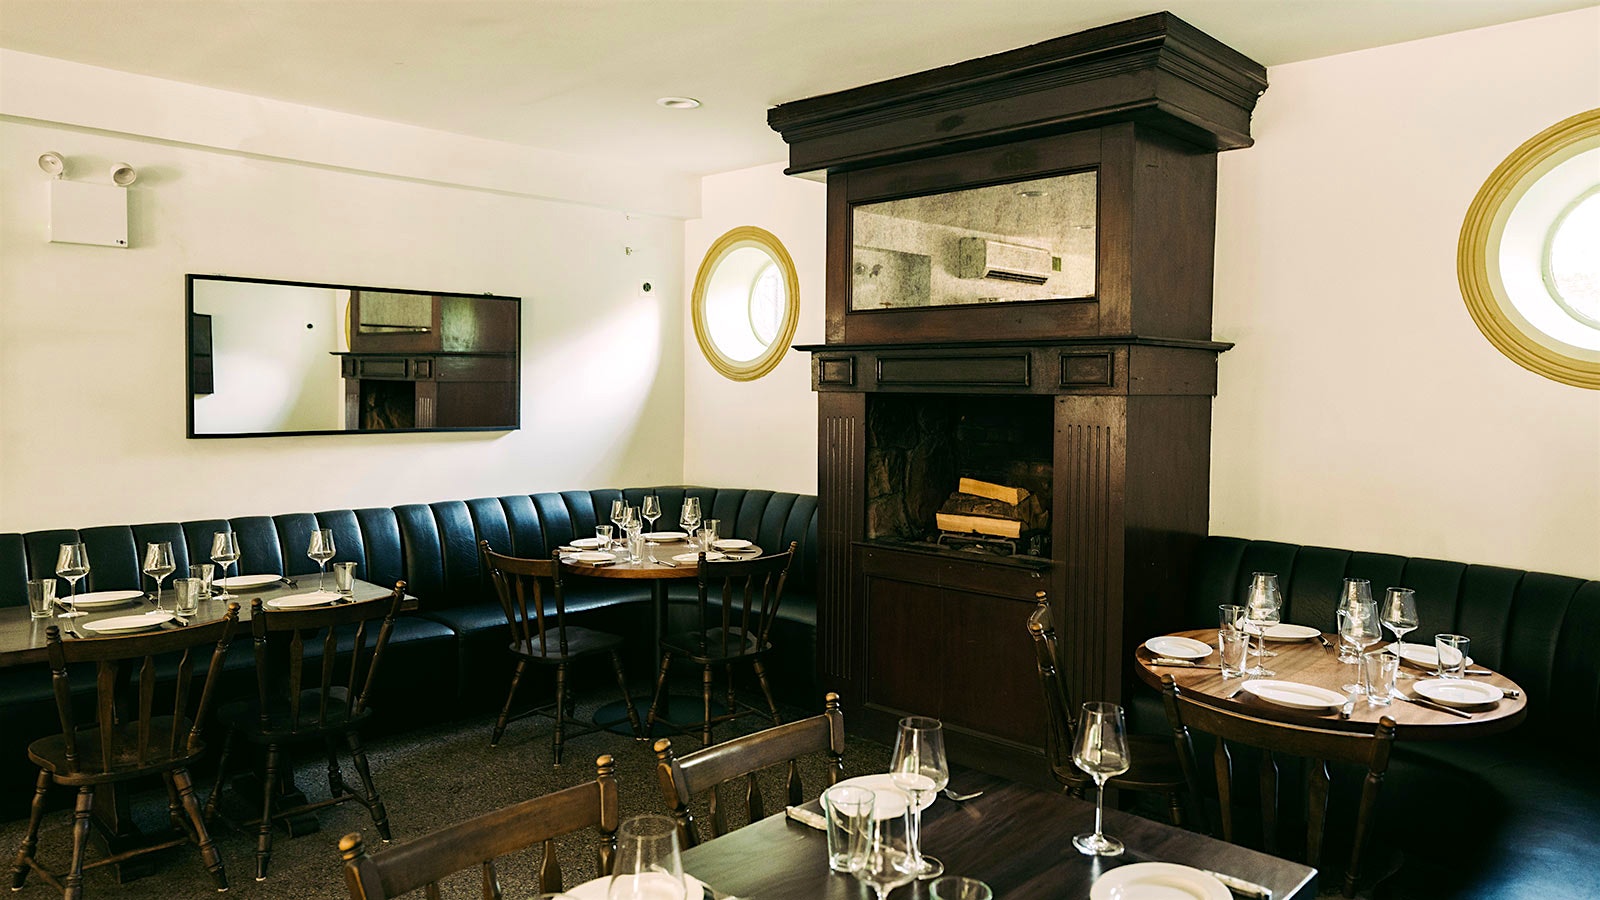     The dining room in Gus's chop house with dark banquettes, dark wood tables and fireplace cover